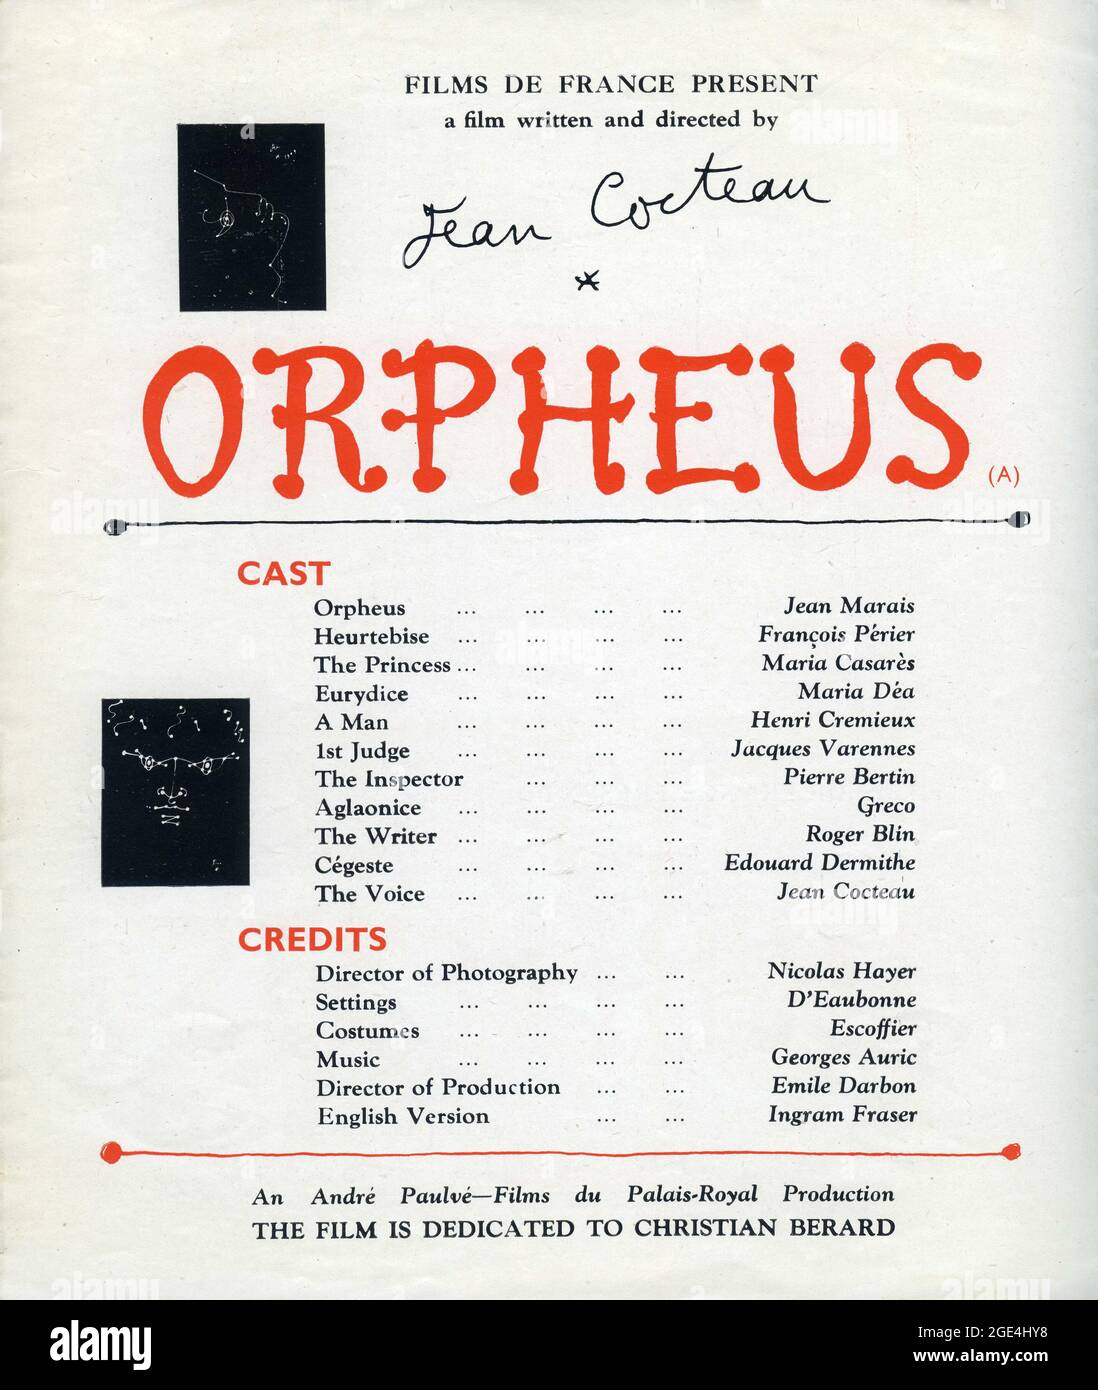 Cast and Credits list from British synopsis sheet with drawings by JEAN COCTEAU for  ORPHÉE / ORPHEUS 1950 director / writer JEAN COCTEAU music Georges Auric costume design Marcel Escoffier Andre Paulve Film / Films du Palais Royal / Films de France (in UK) Stock Photo